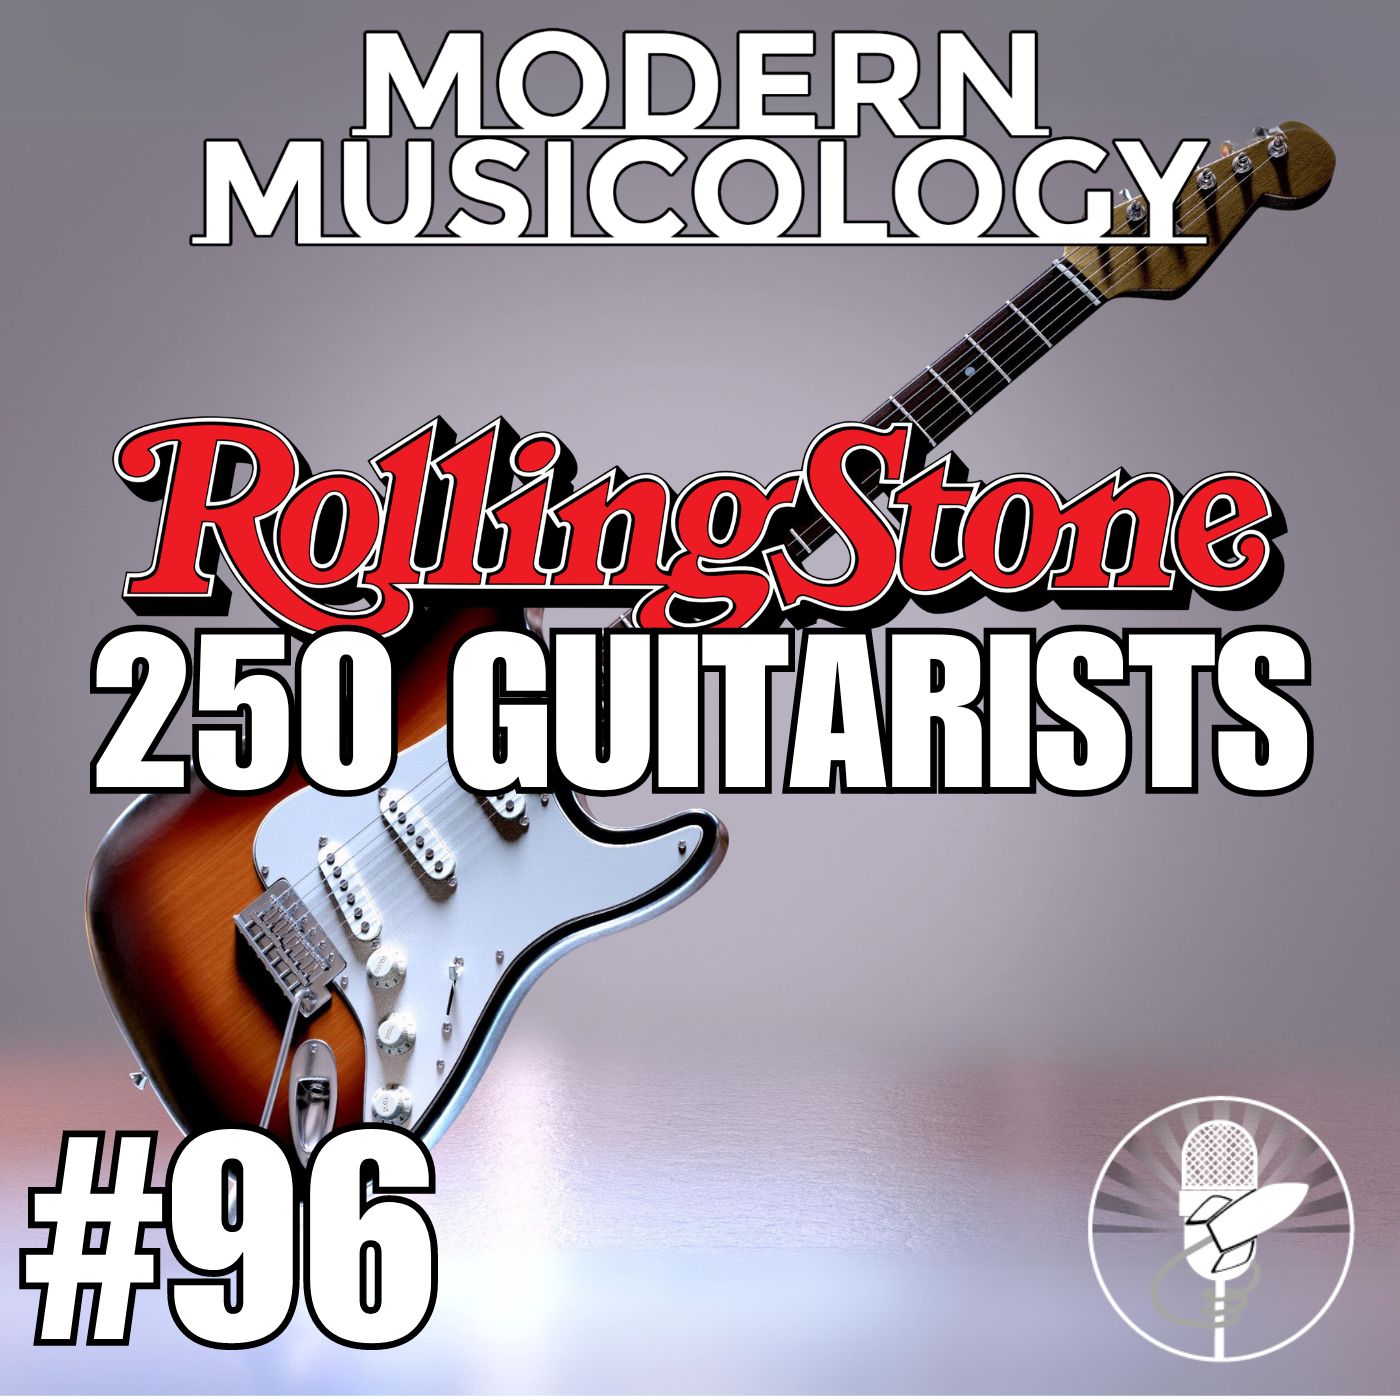 Modern Musicology #96 - Reviewing the Rolling Stone list of 250 Greatest Guitarists